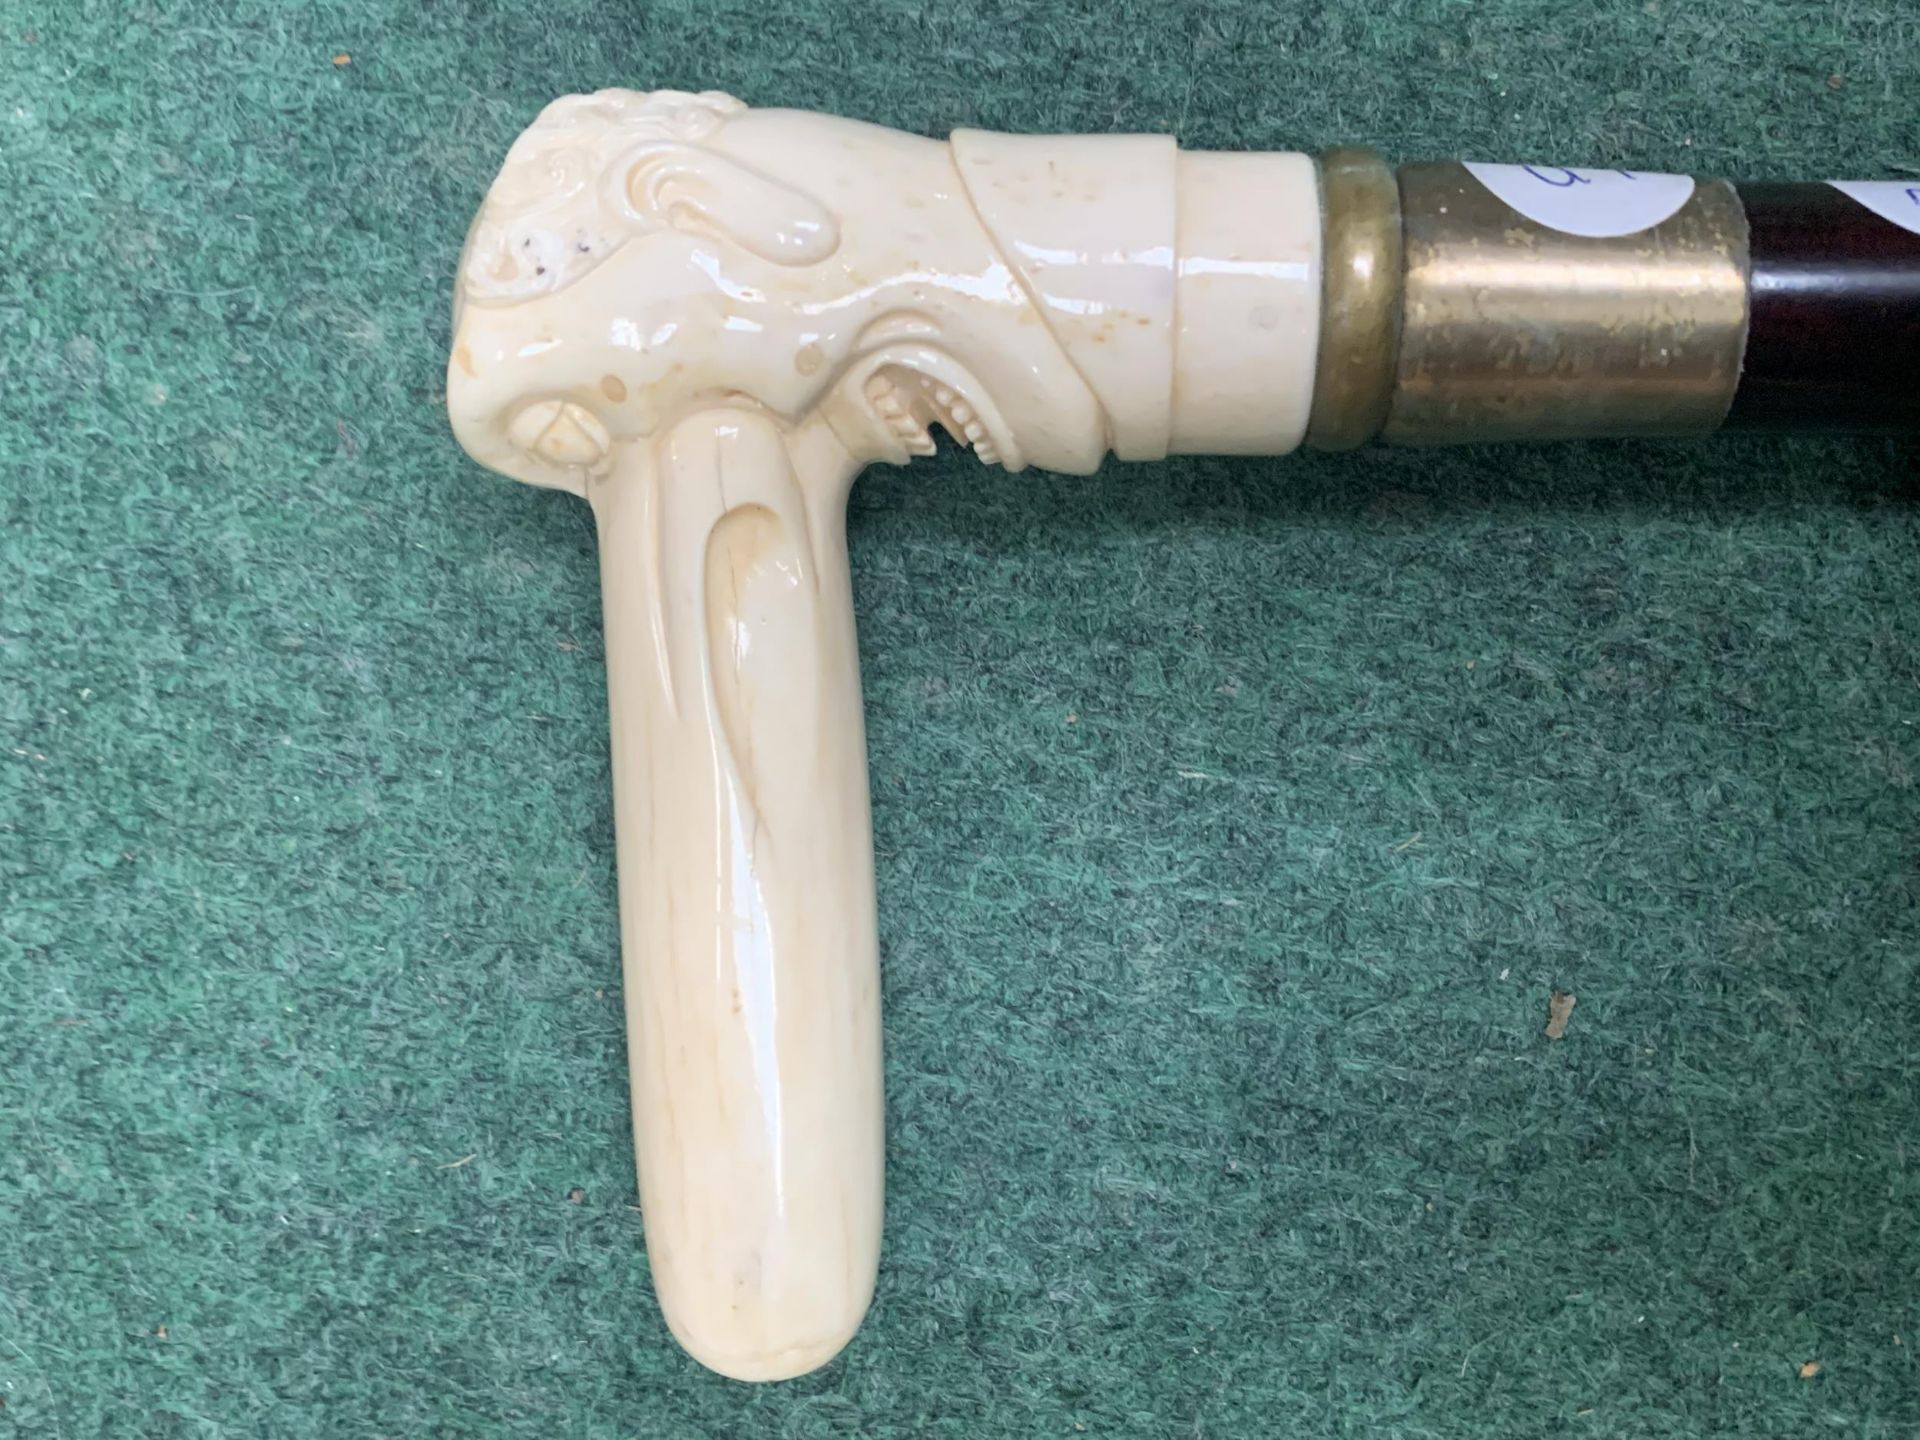 A VINTAGE WALKING STICK WITH AN UNUSUAL BONE HANDLE OF A FACE WITH A LONG NOSE - Image 2 of 5